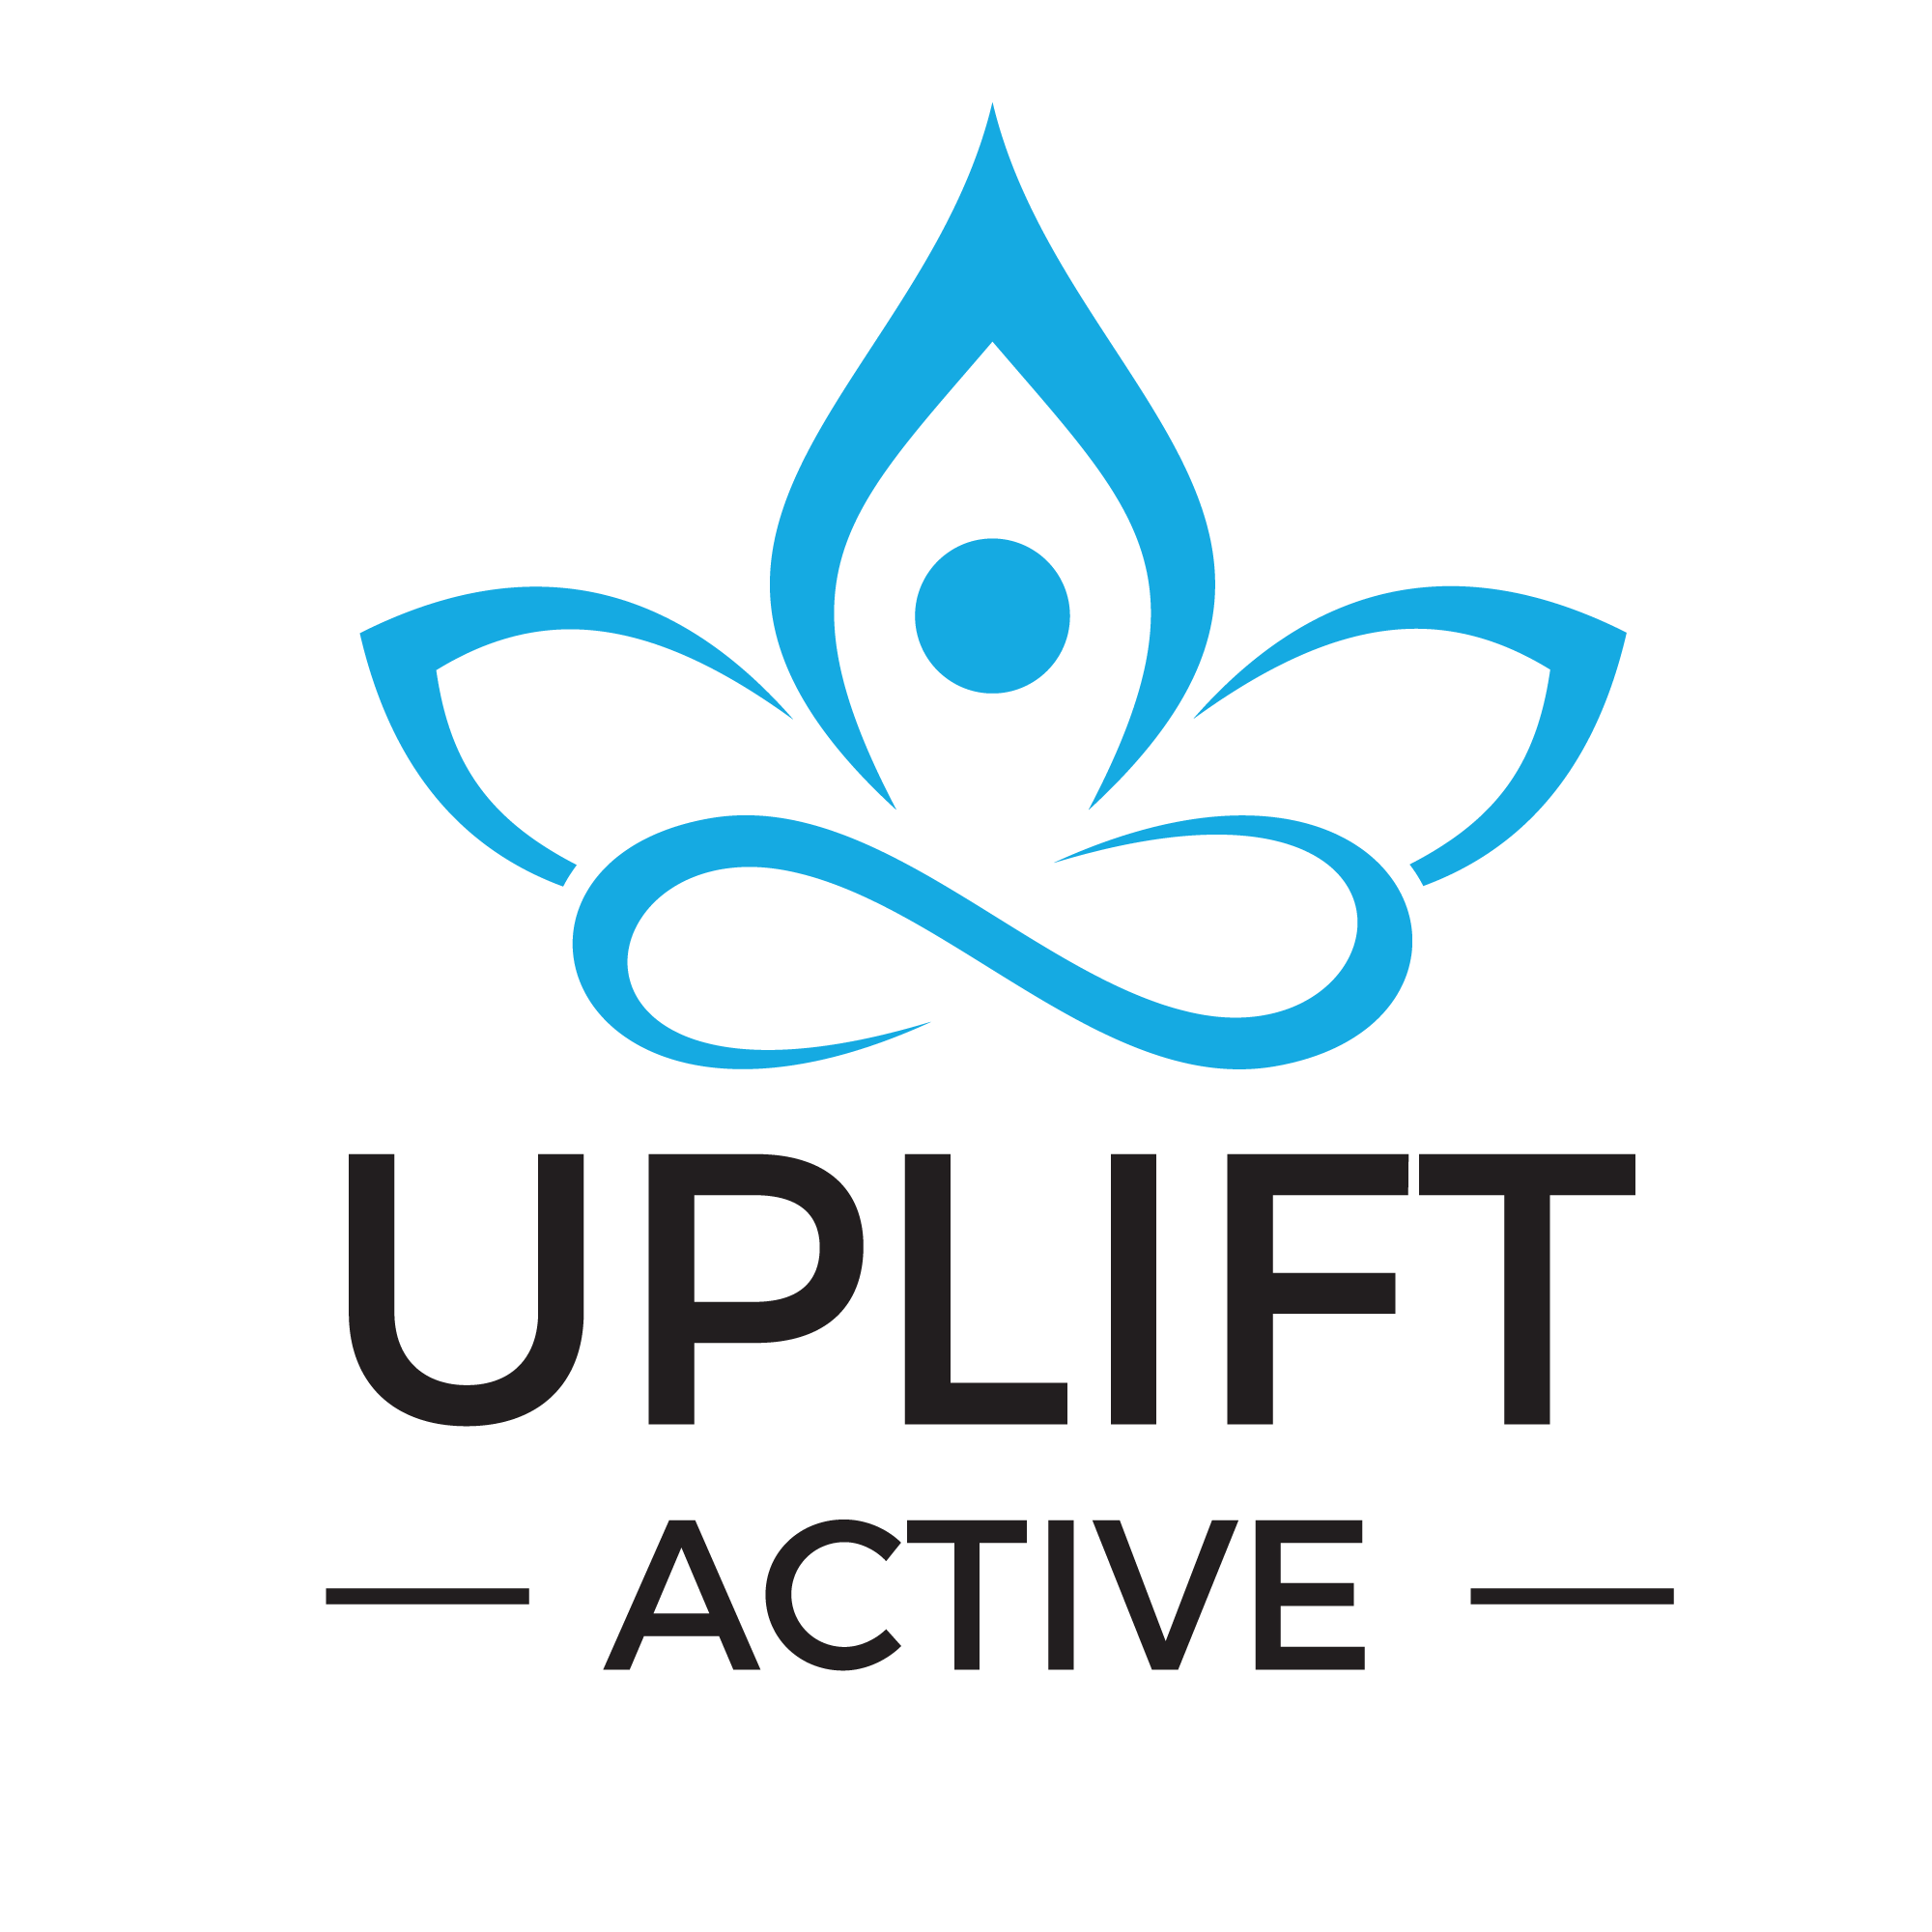 Introducing Uplift Active!